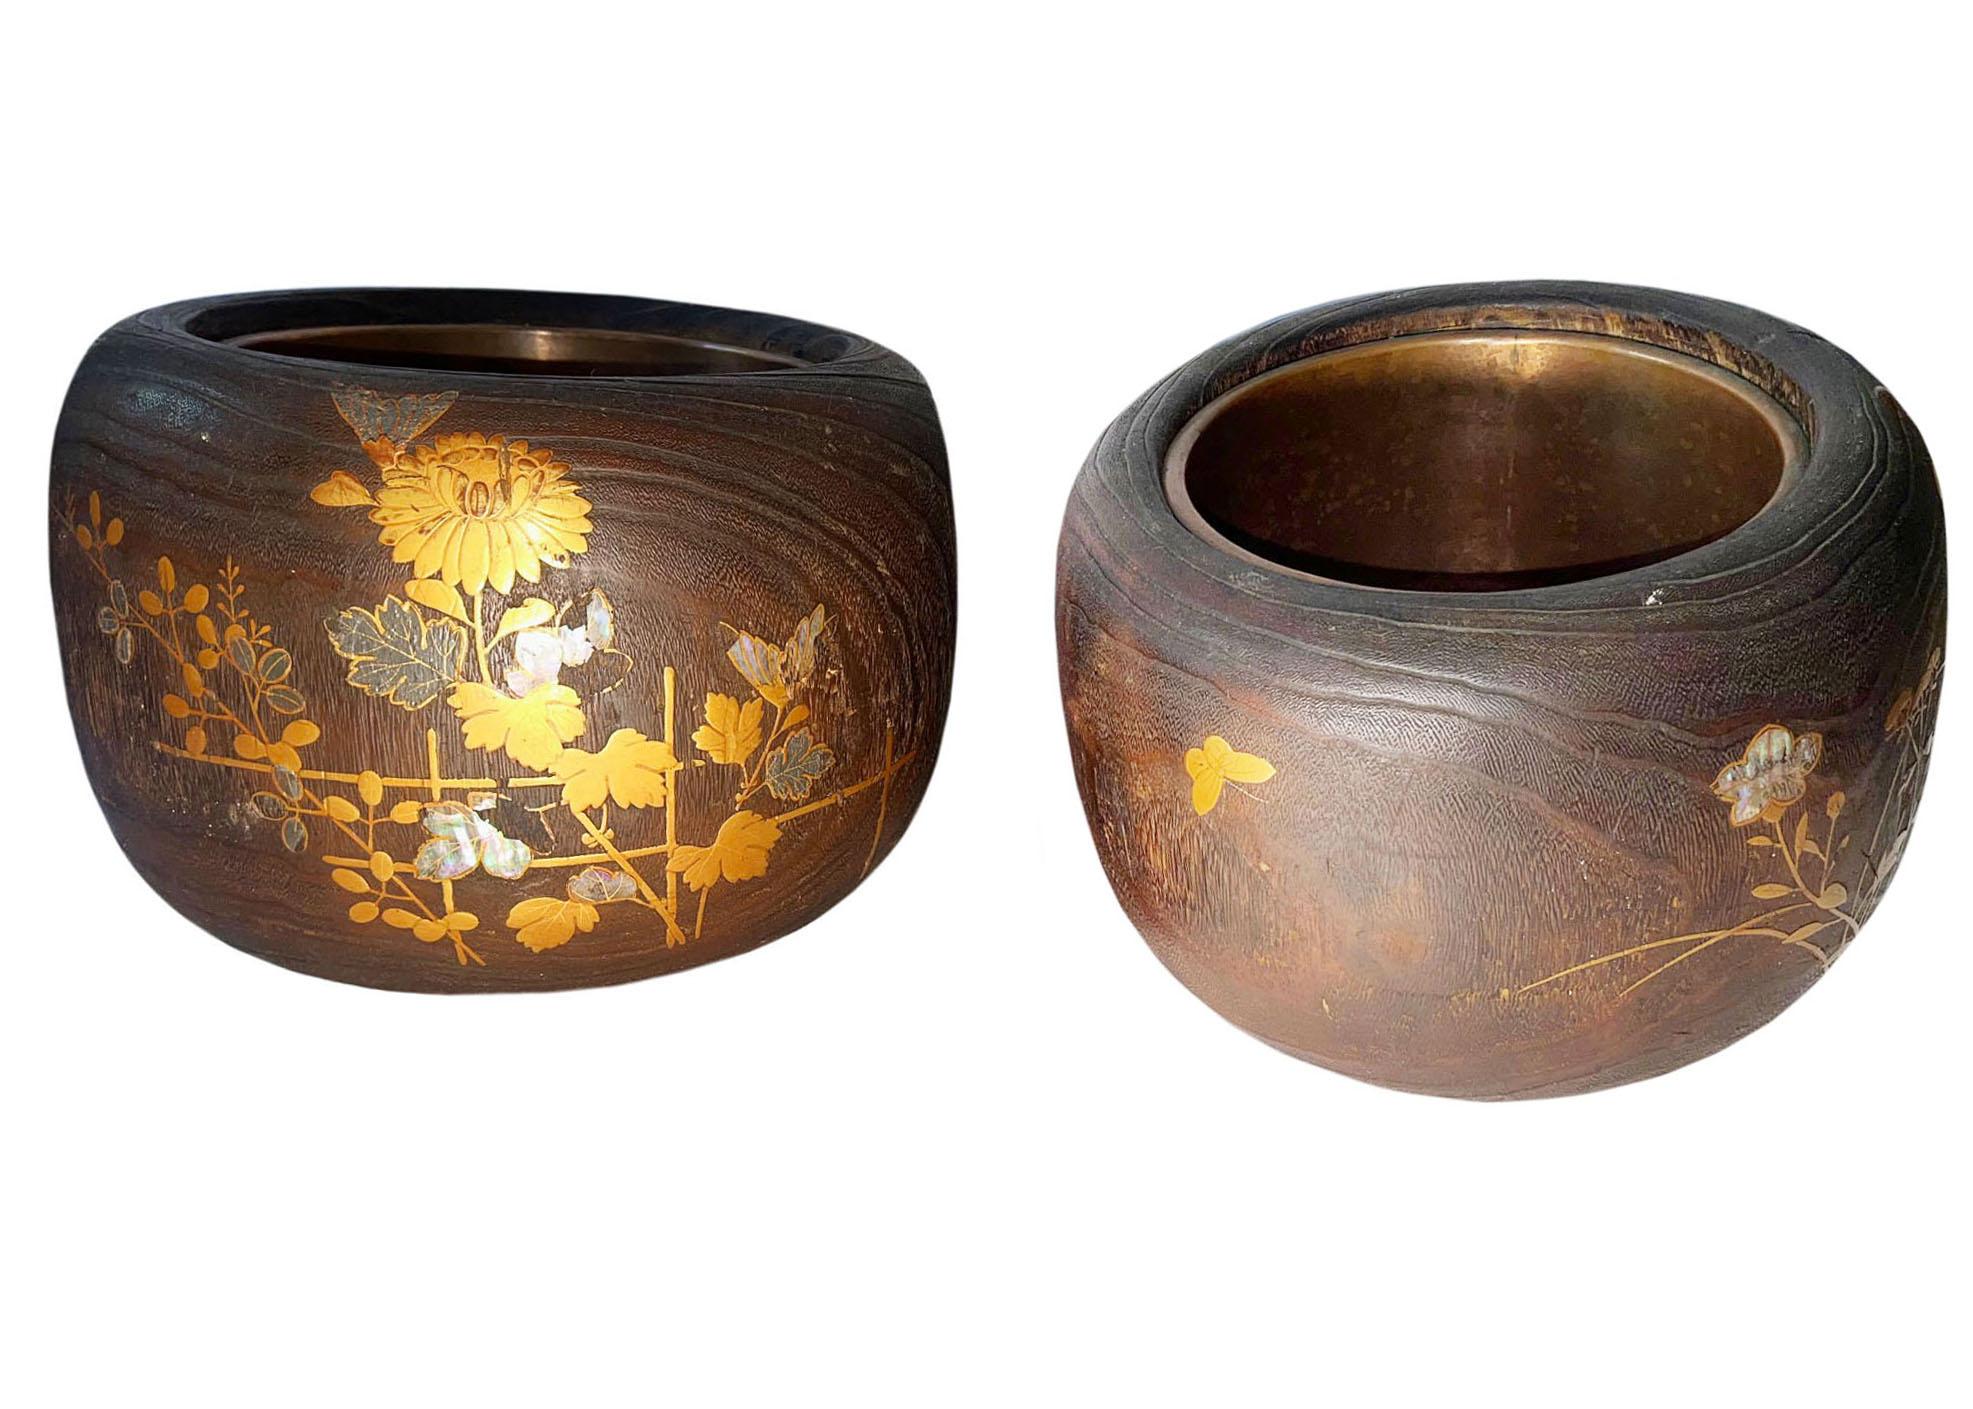 Pair of antique Japanese wooden hibachi braziers with lacquer and mackie, abalone and gilding with chrysanthemums. Some losses to decoration. Circa 1890 - 1900.  
